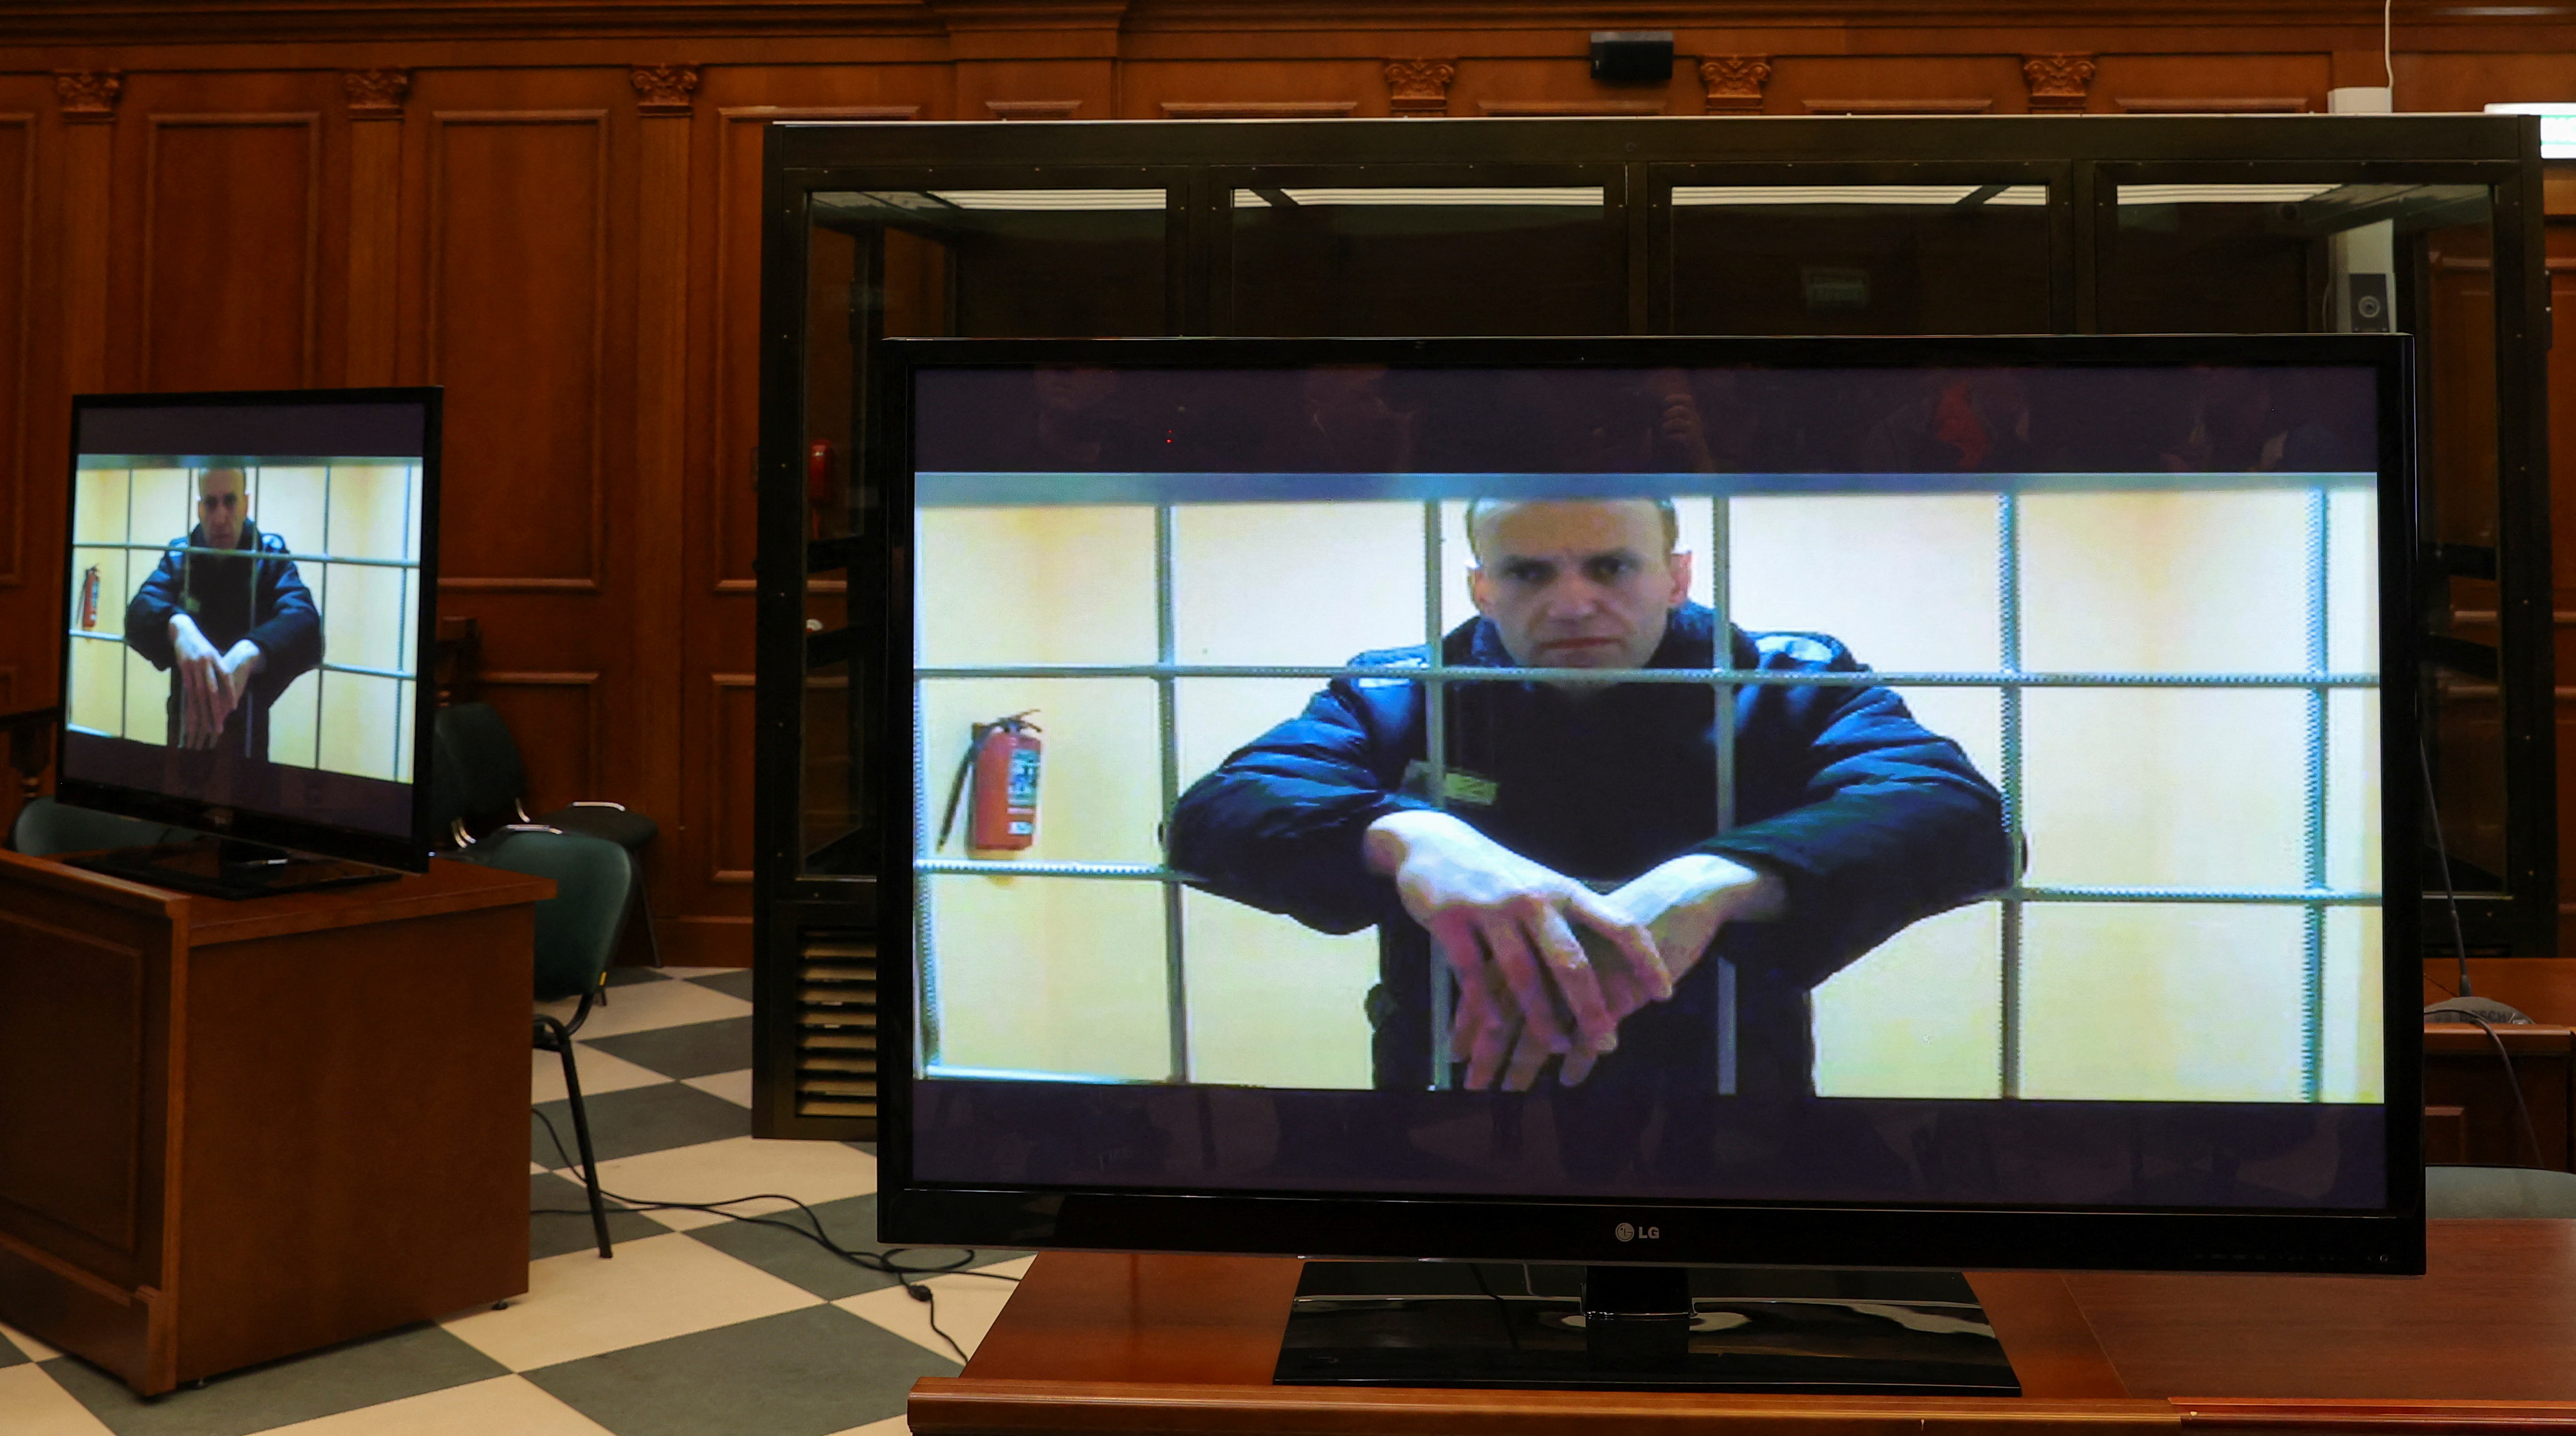 Jailed Russian opposition leader Alexei Navalny is seen on screens during a court hearing in Moscow